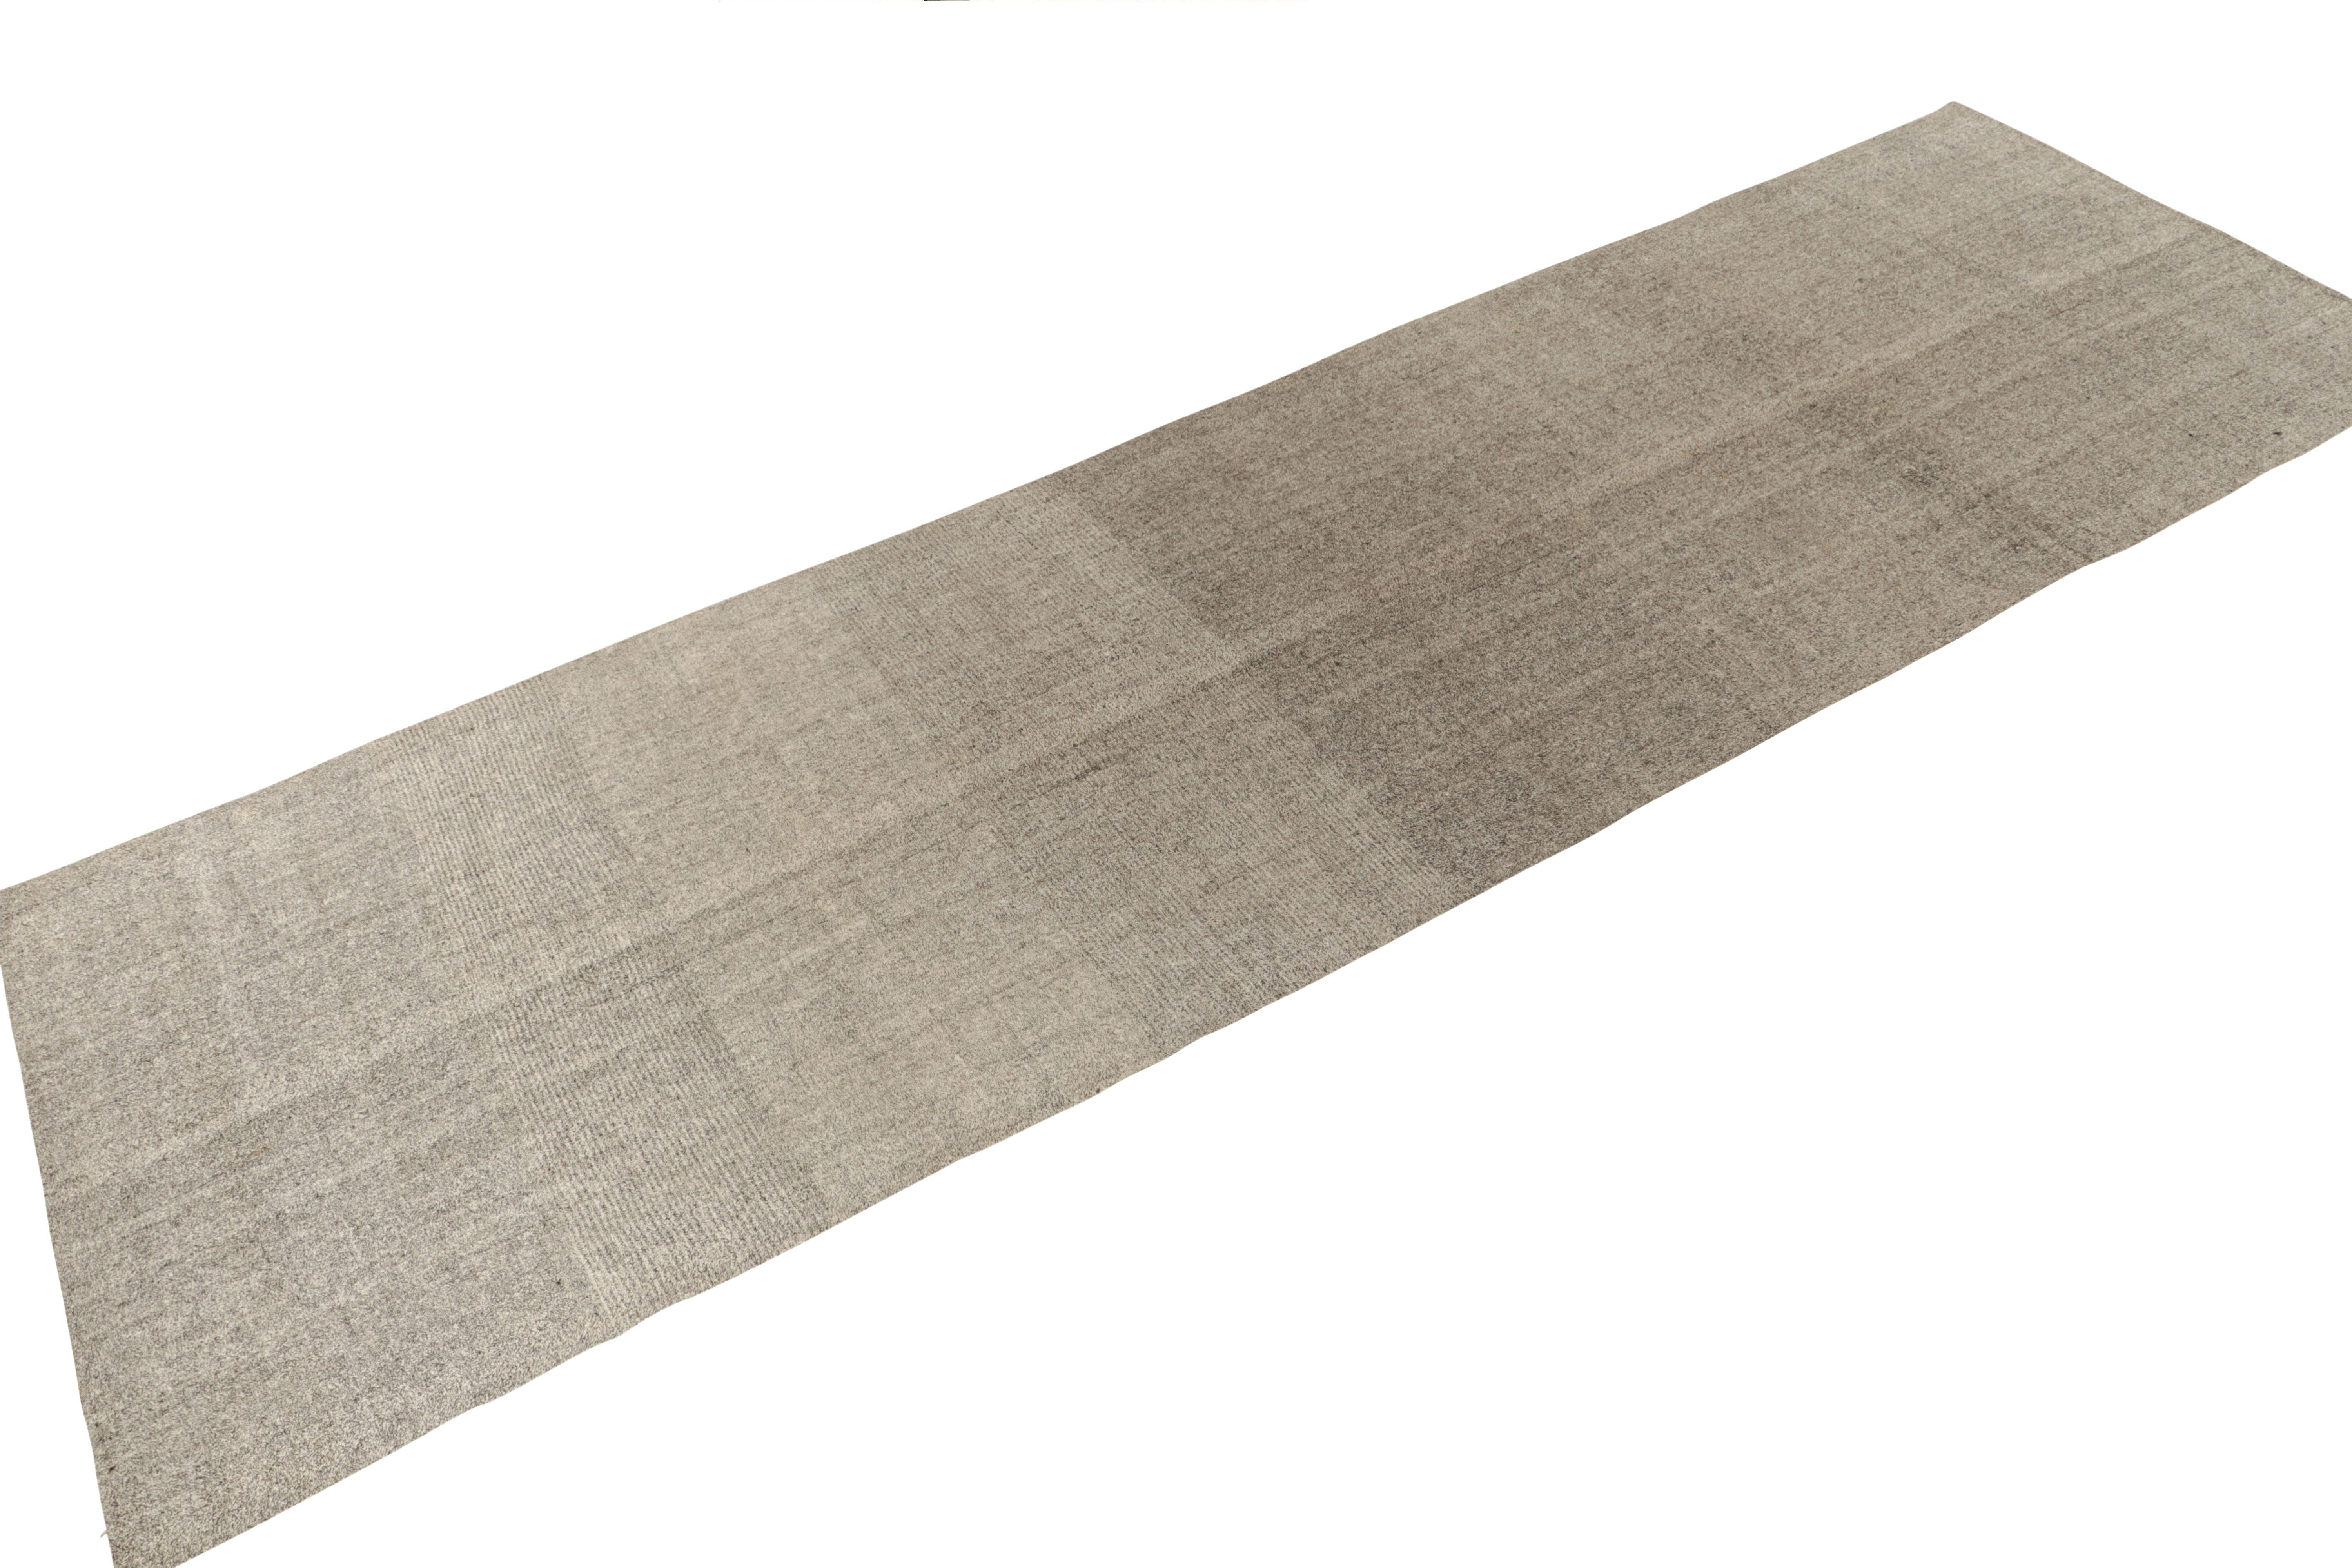 Connoting minimalist midcentury aesthetics, a vintage kilim rug from our flatweave selections. Originating from Turkey, the rug relishes midcentury aesthetics with white & black never seen before in a rare 5x18 length. From the 1970s, a gallery size